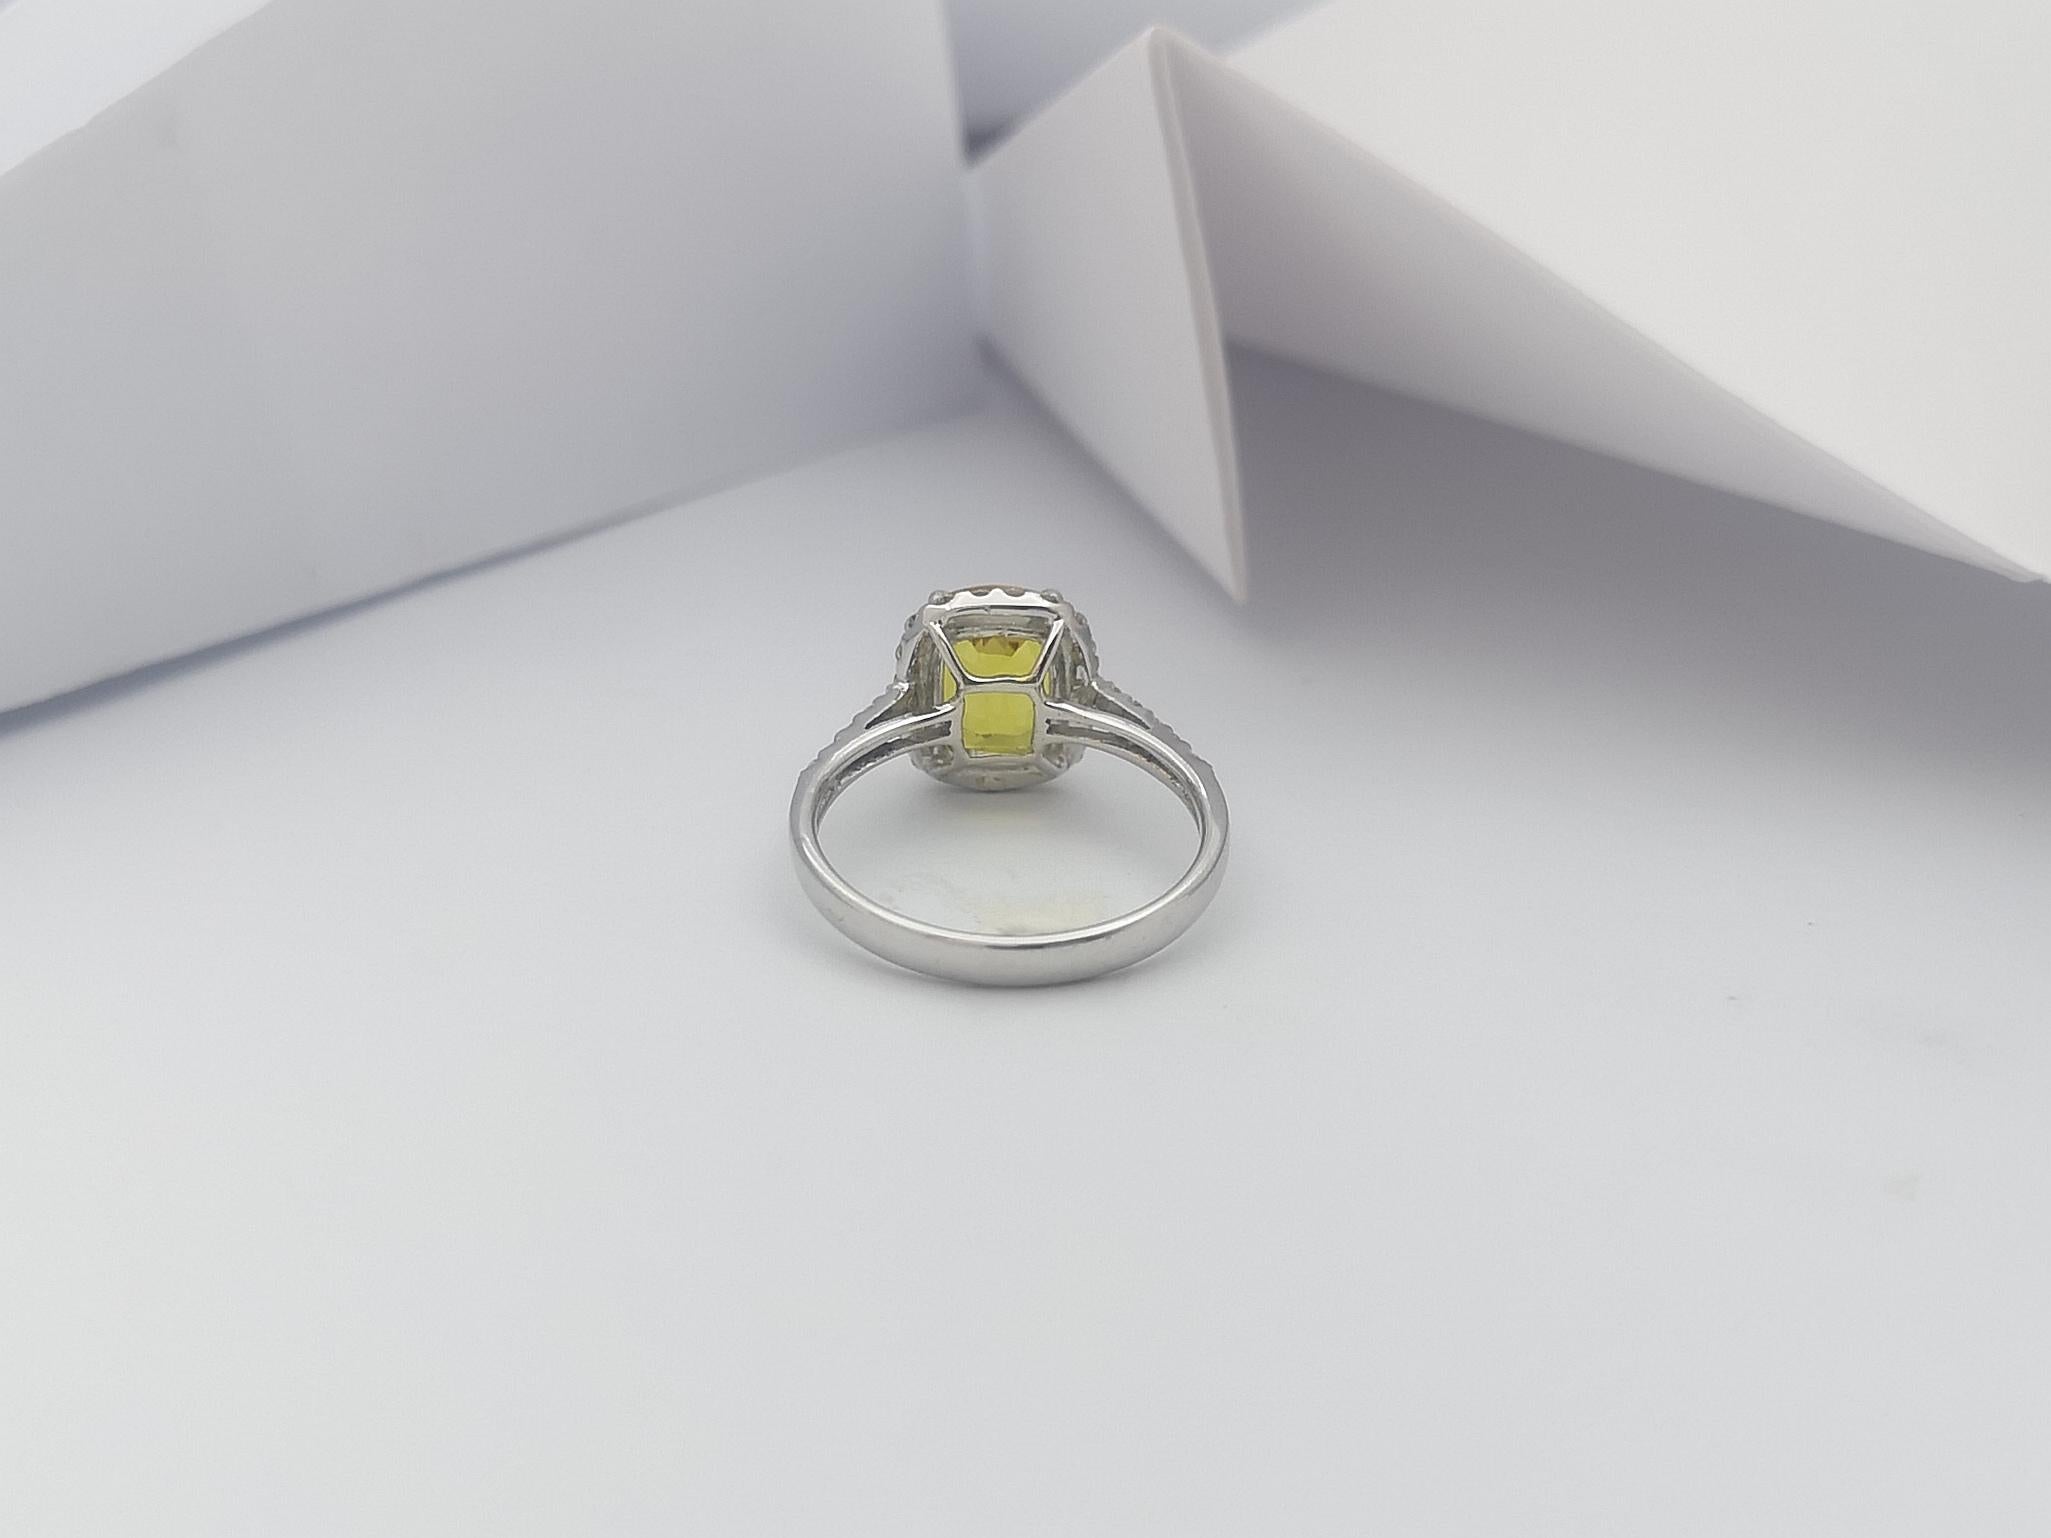 Cushion Cut Yellow Sapphire with Diamond Halo Ring Set in 18 Karat White Gold For Sale 2